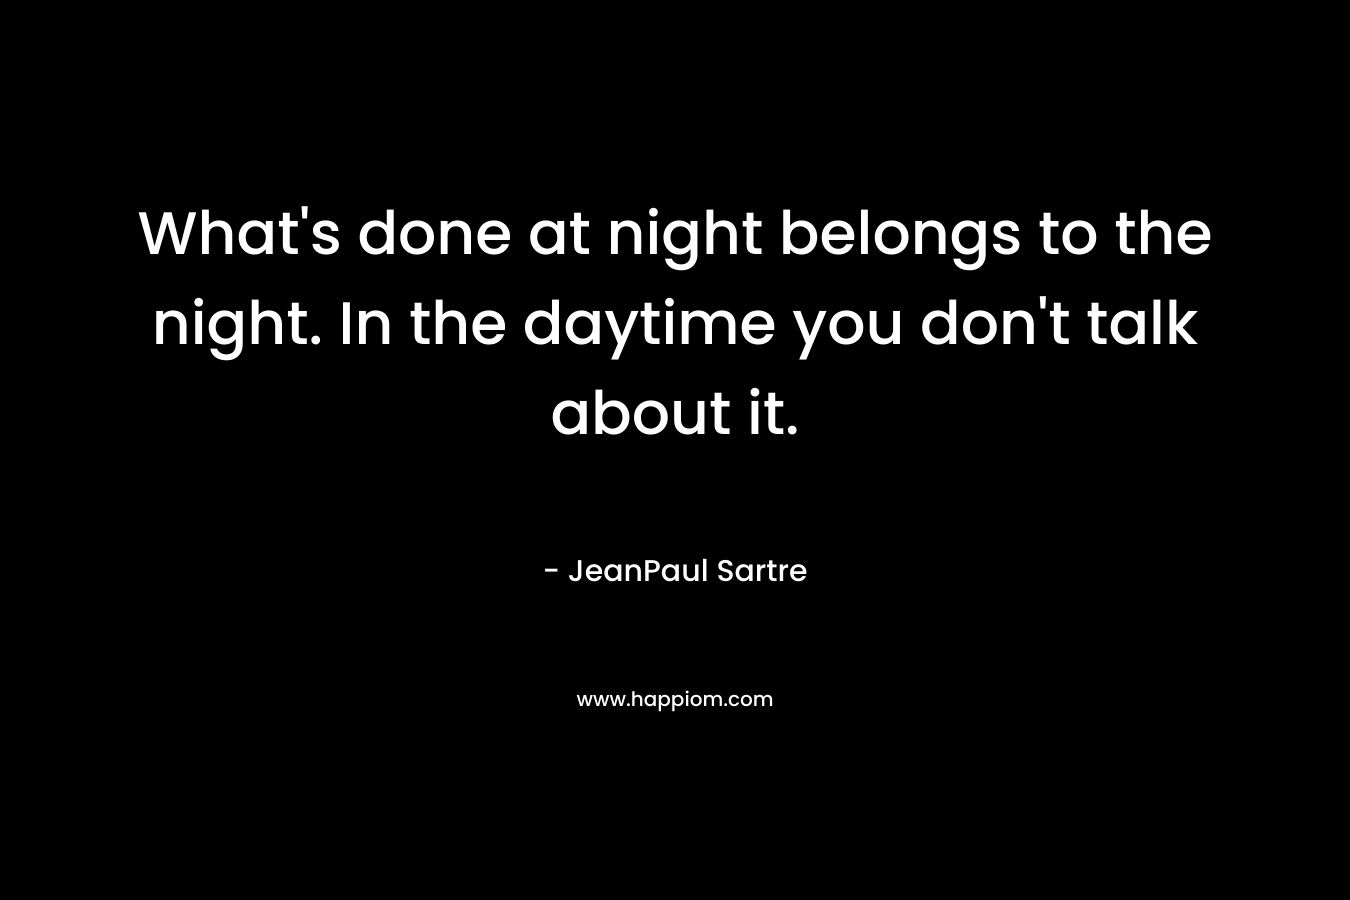 What’s done at night belongs to the night. In the daytime you don’t talk about it. – JeanPaul Sartre